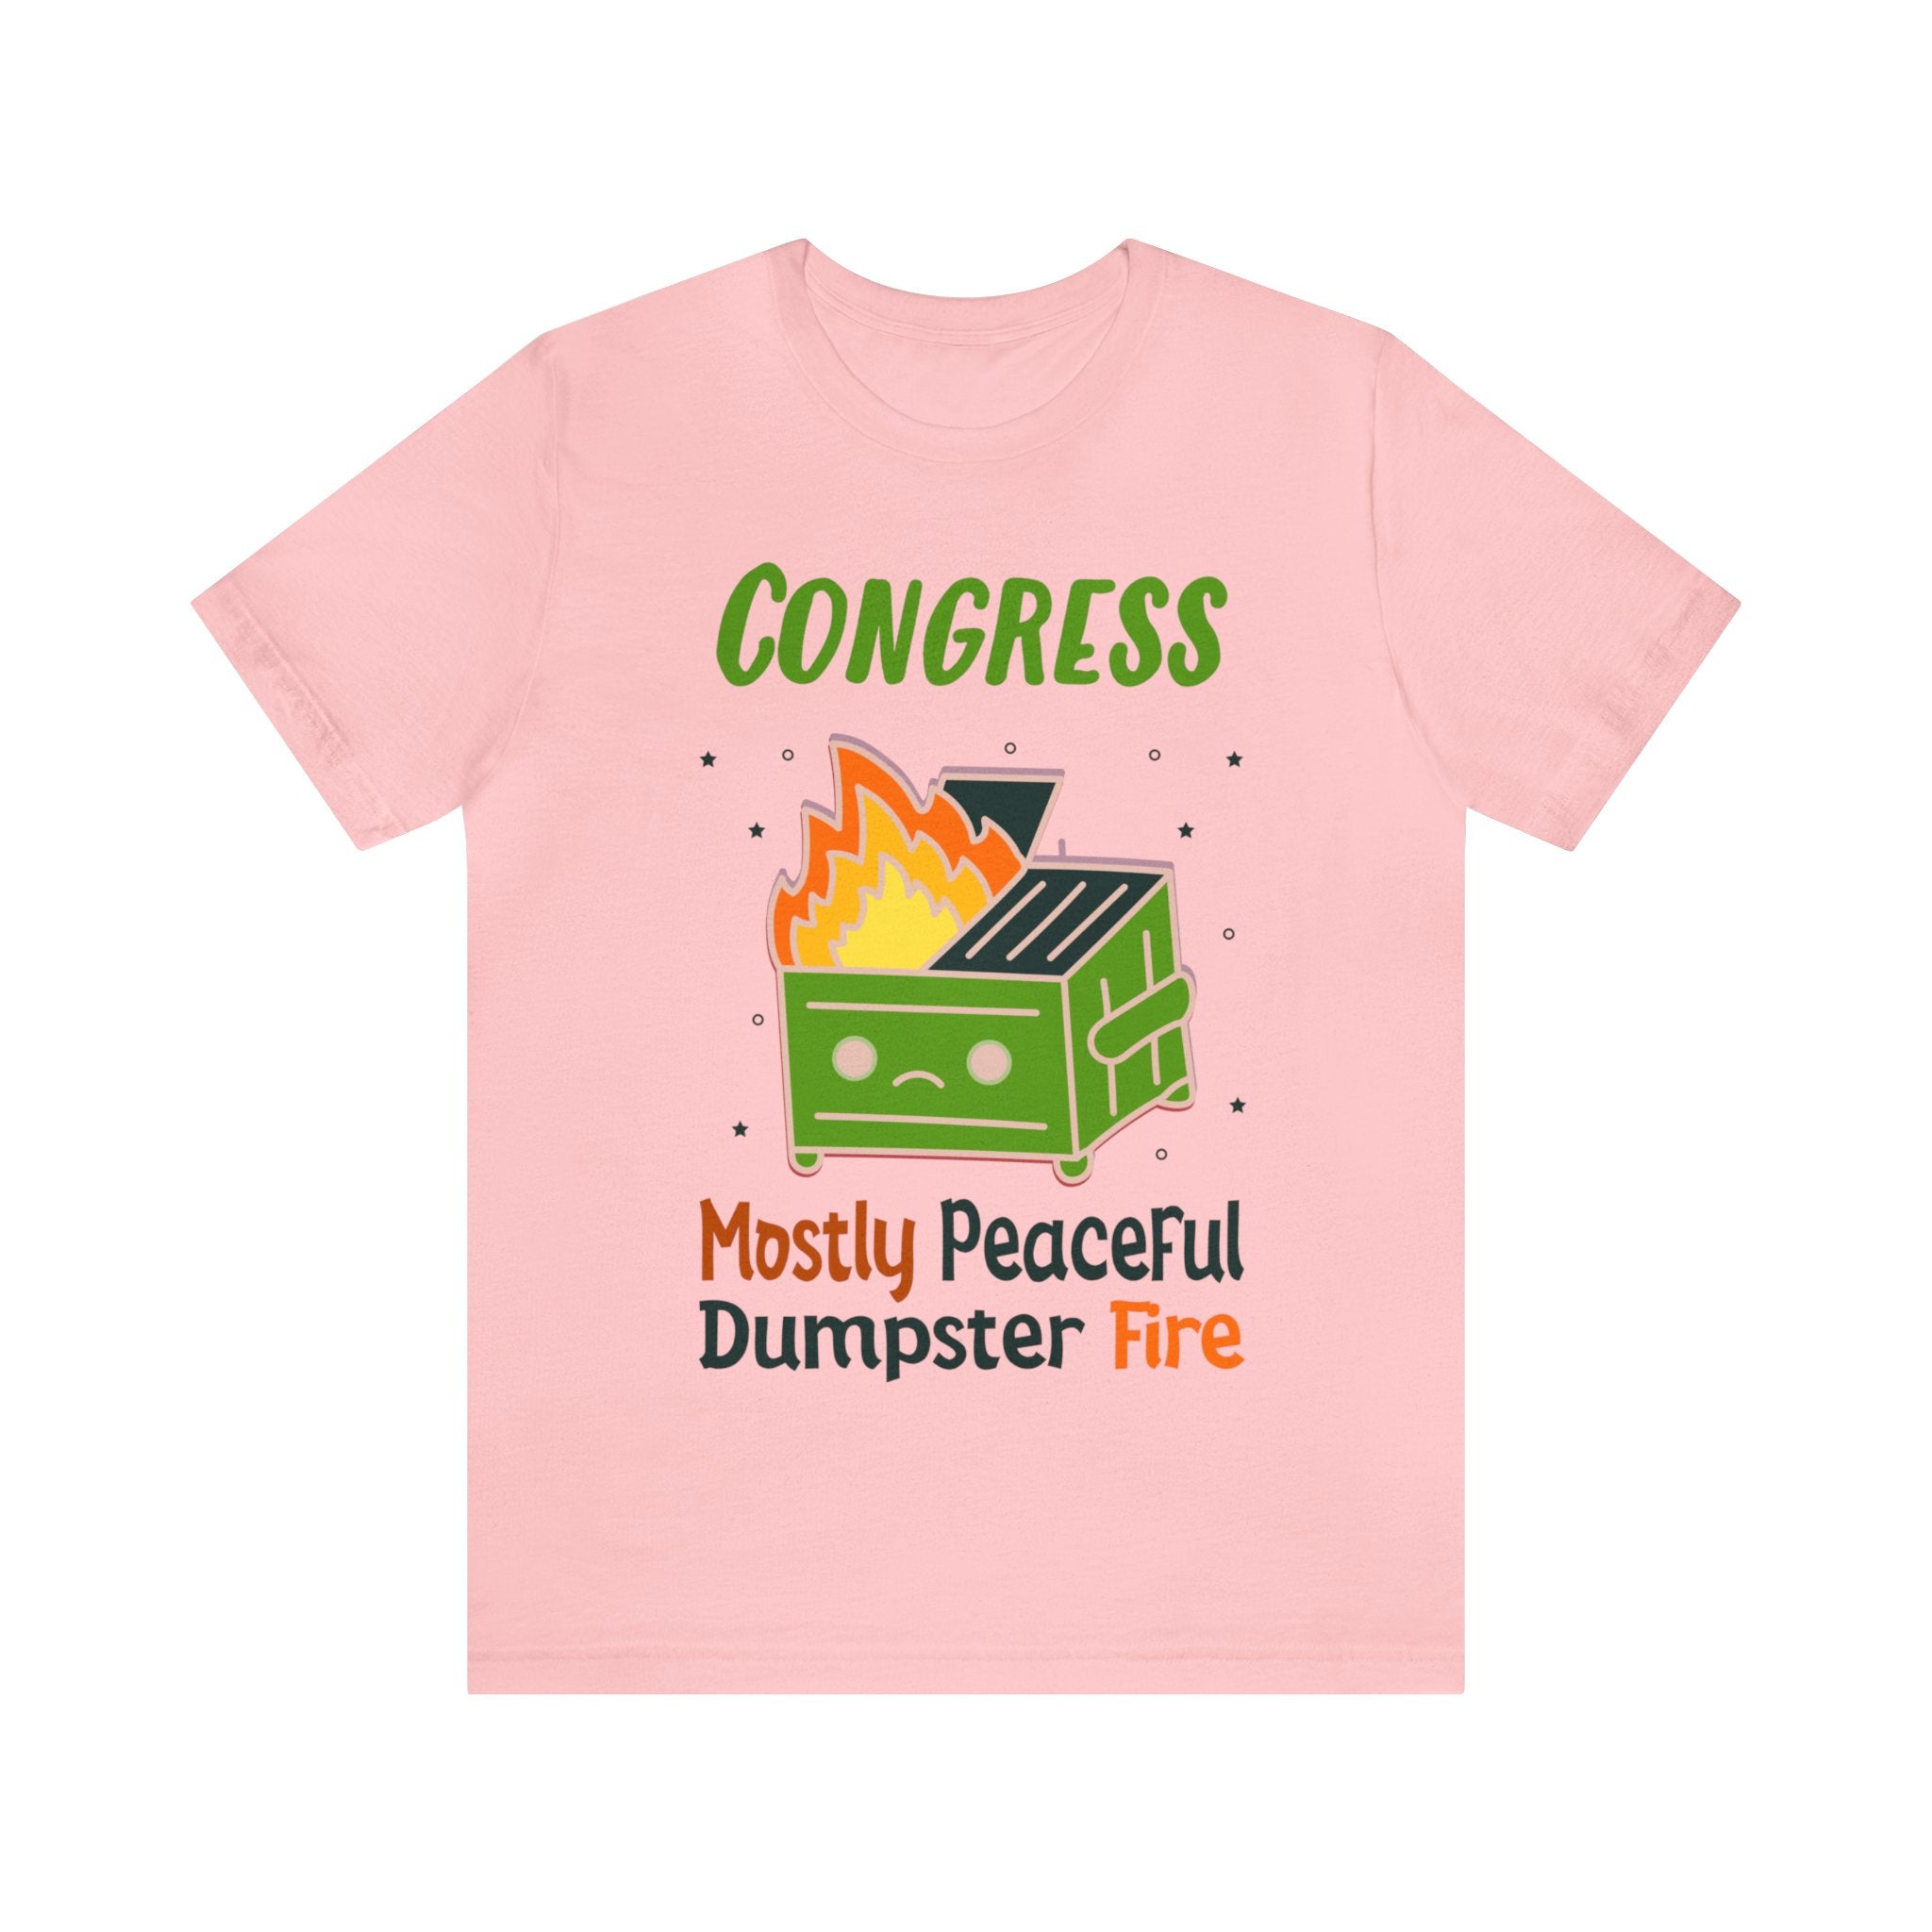 Congress - Mostly Peaceful Dumpster Fire